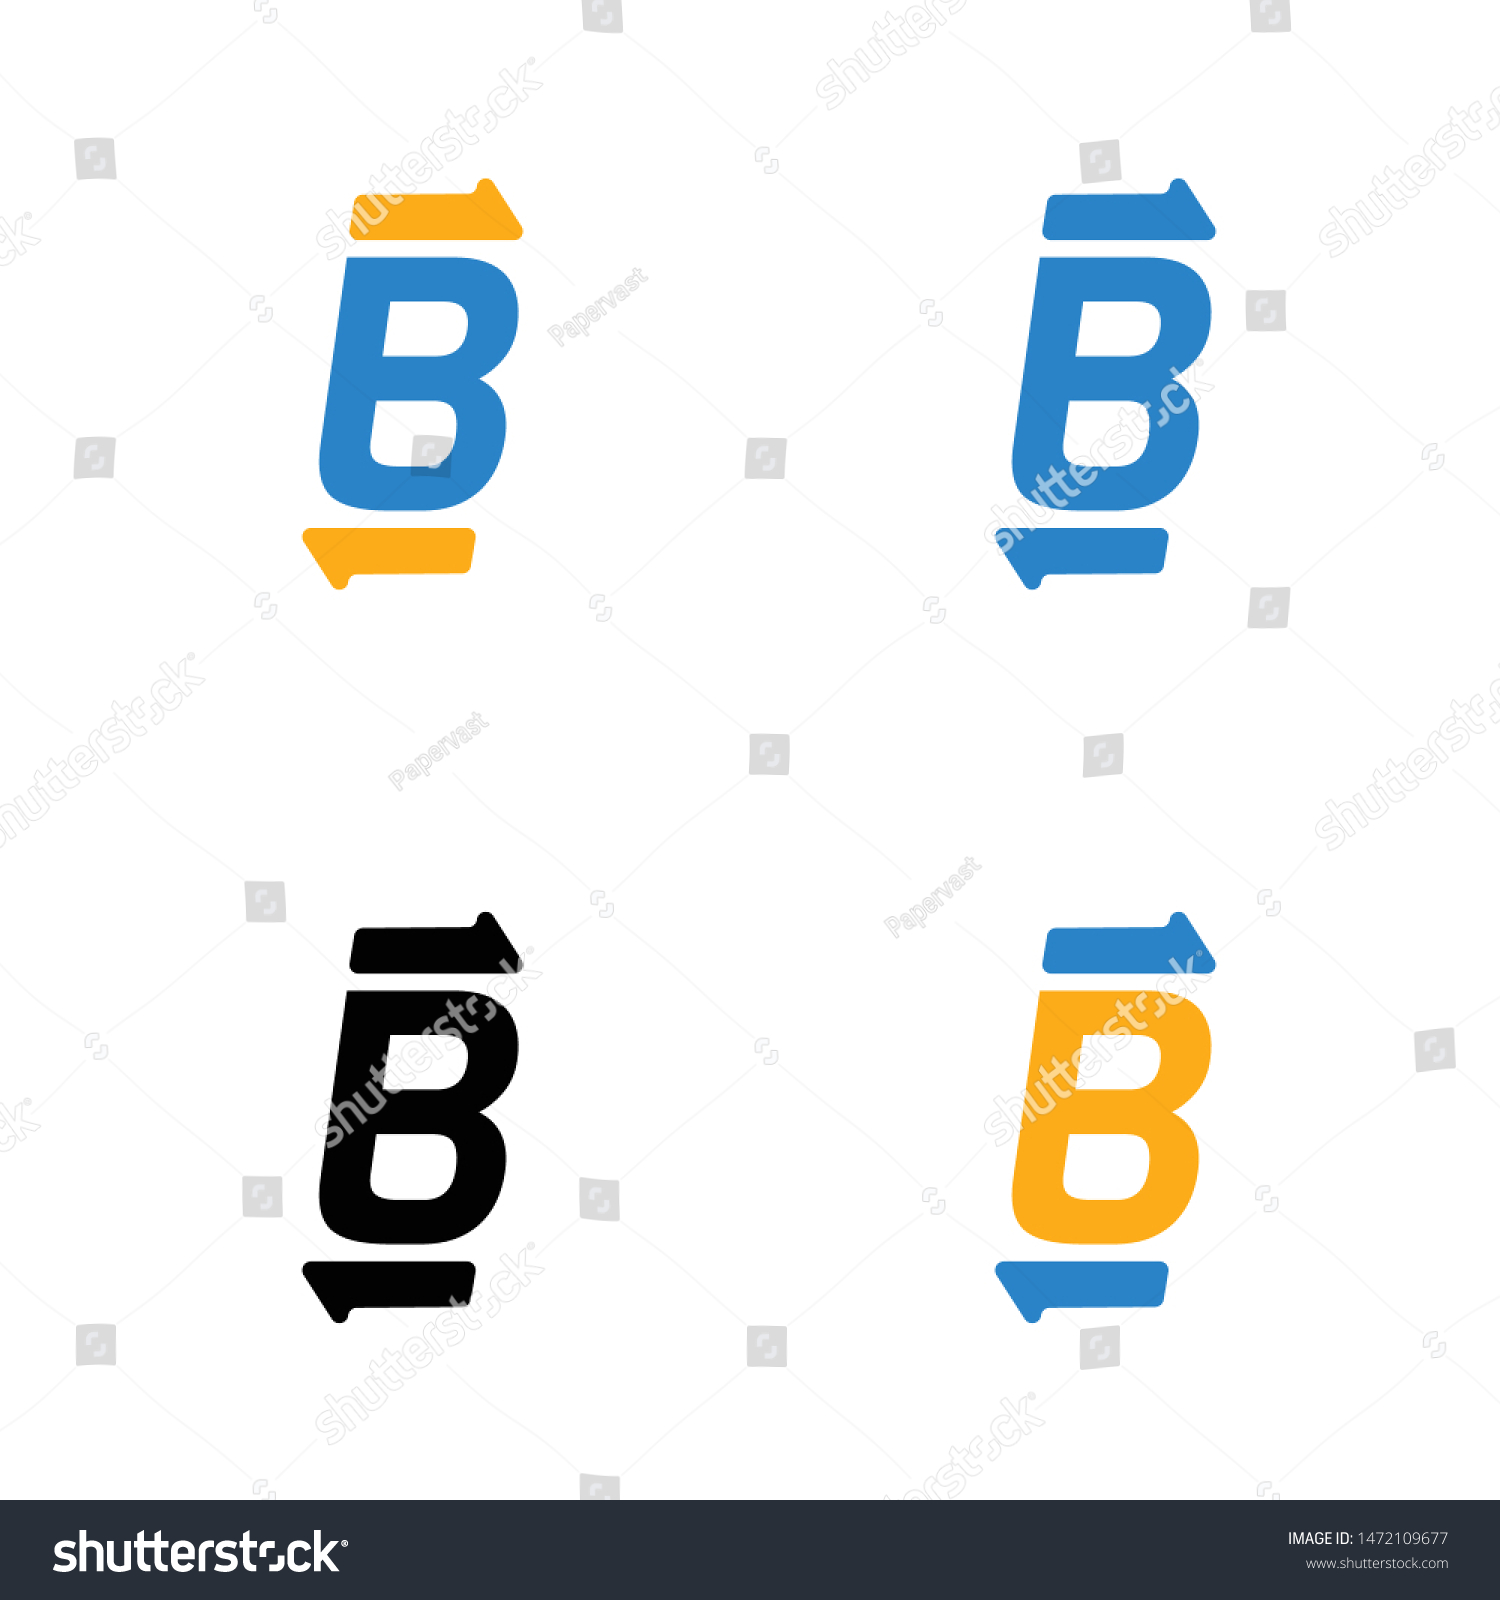 Simple Letter B Logo Financial Apps Stock Vector (Royalty Free ...